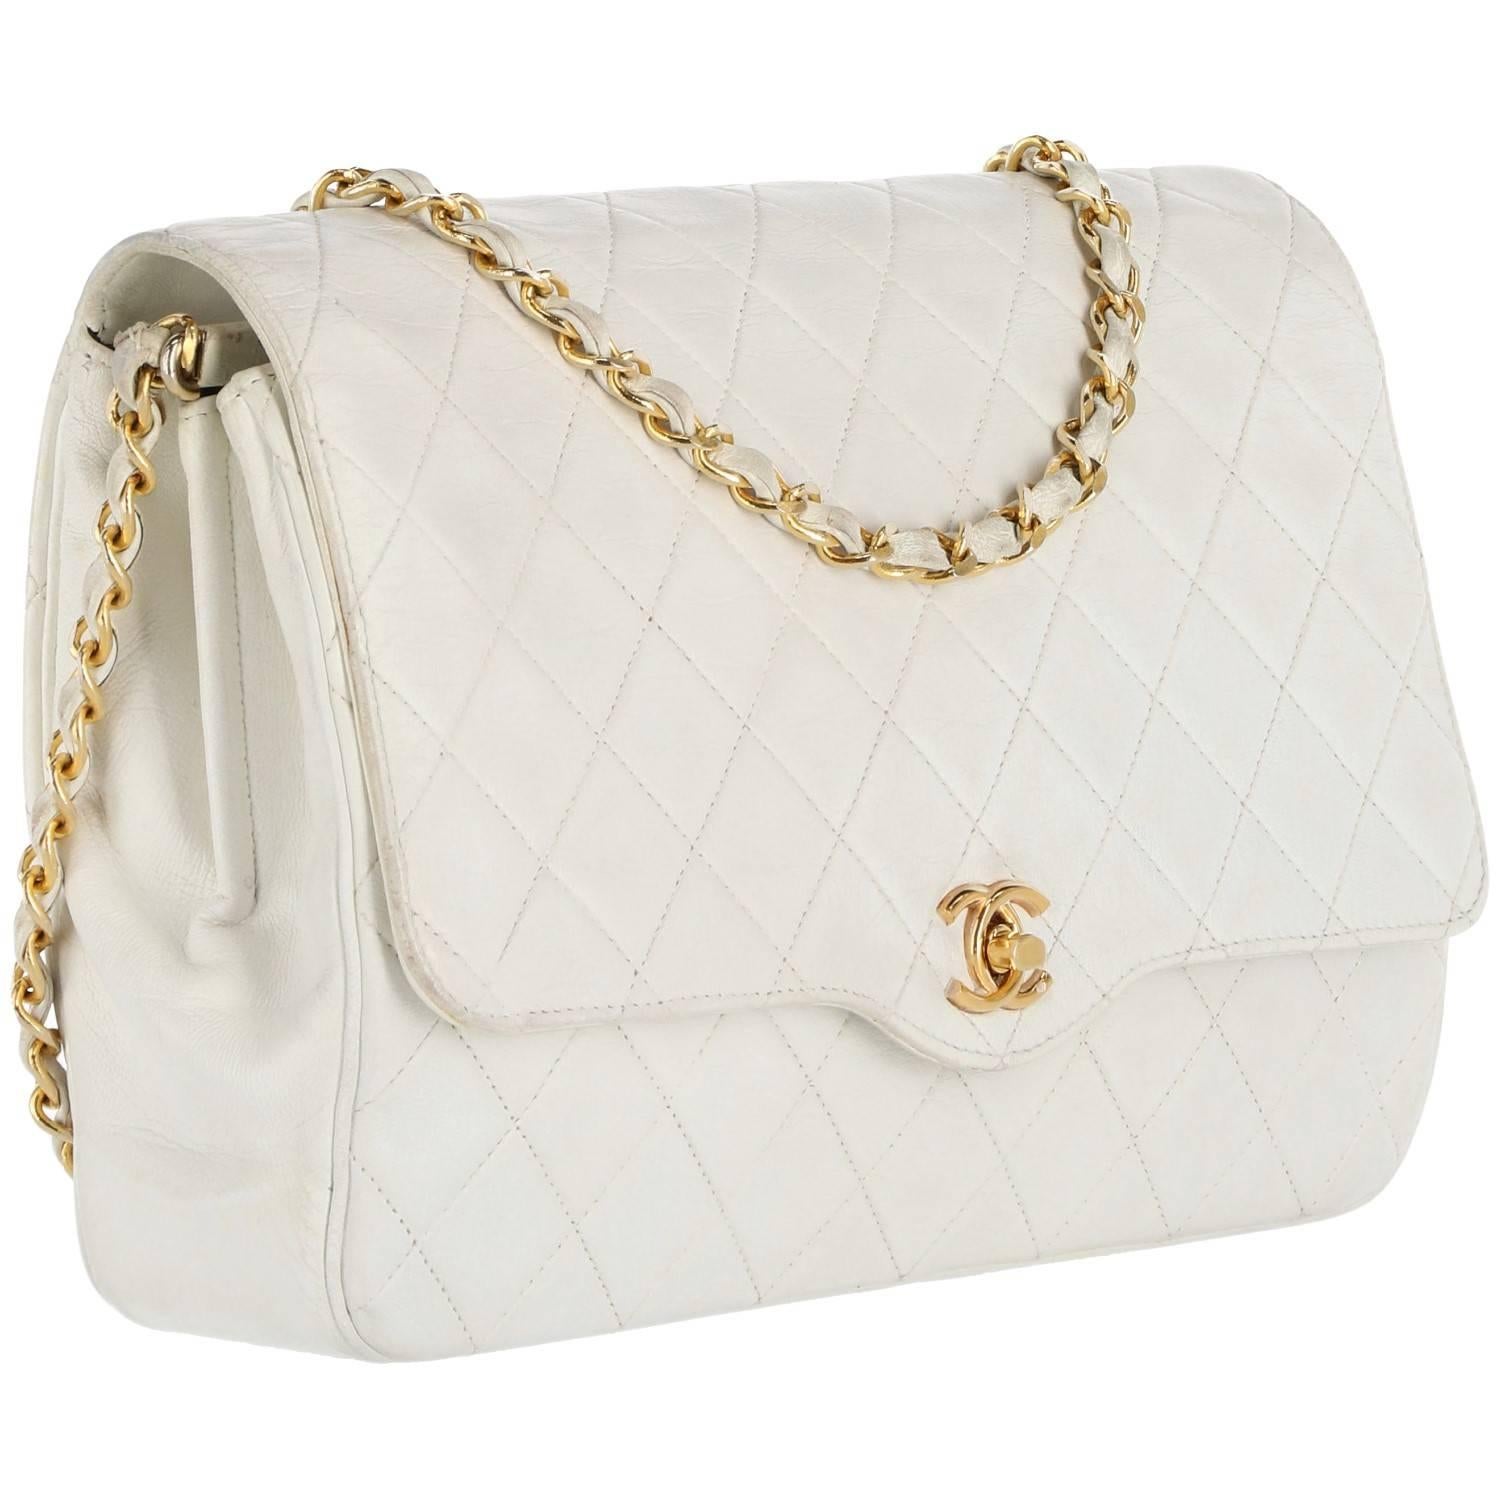 Beautiful Chanel matelassé leather bags in white color with gold chain shoulder strap, braided with leather. It features a classic flap and double 